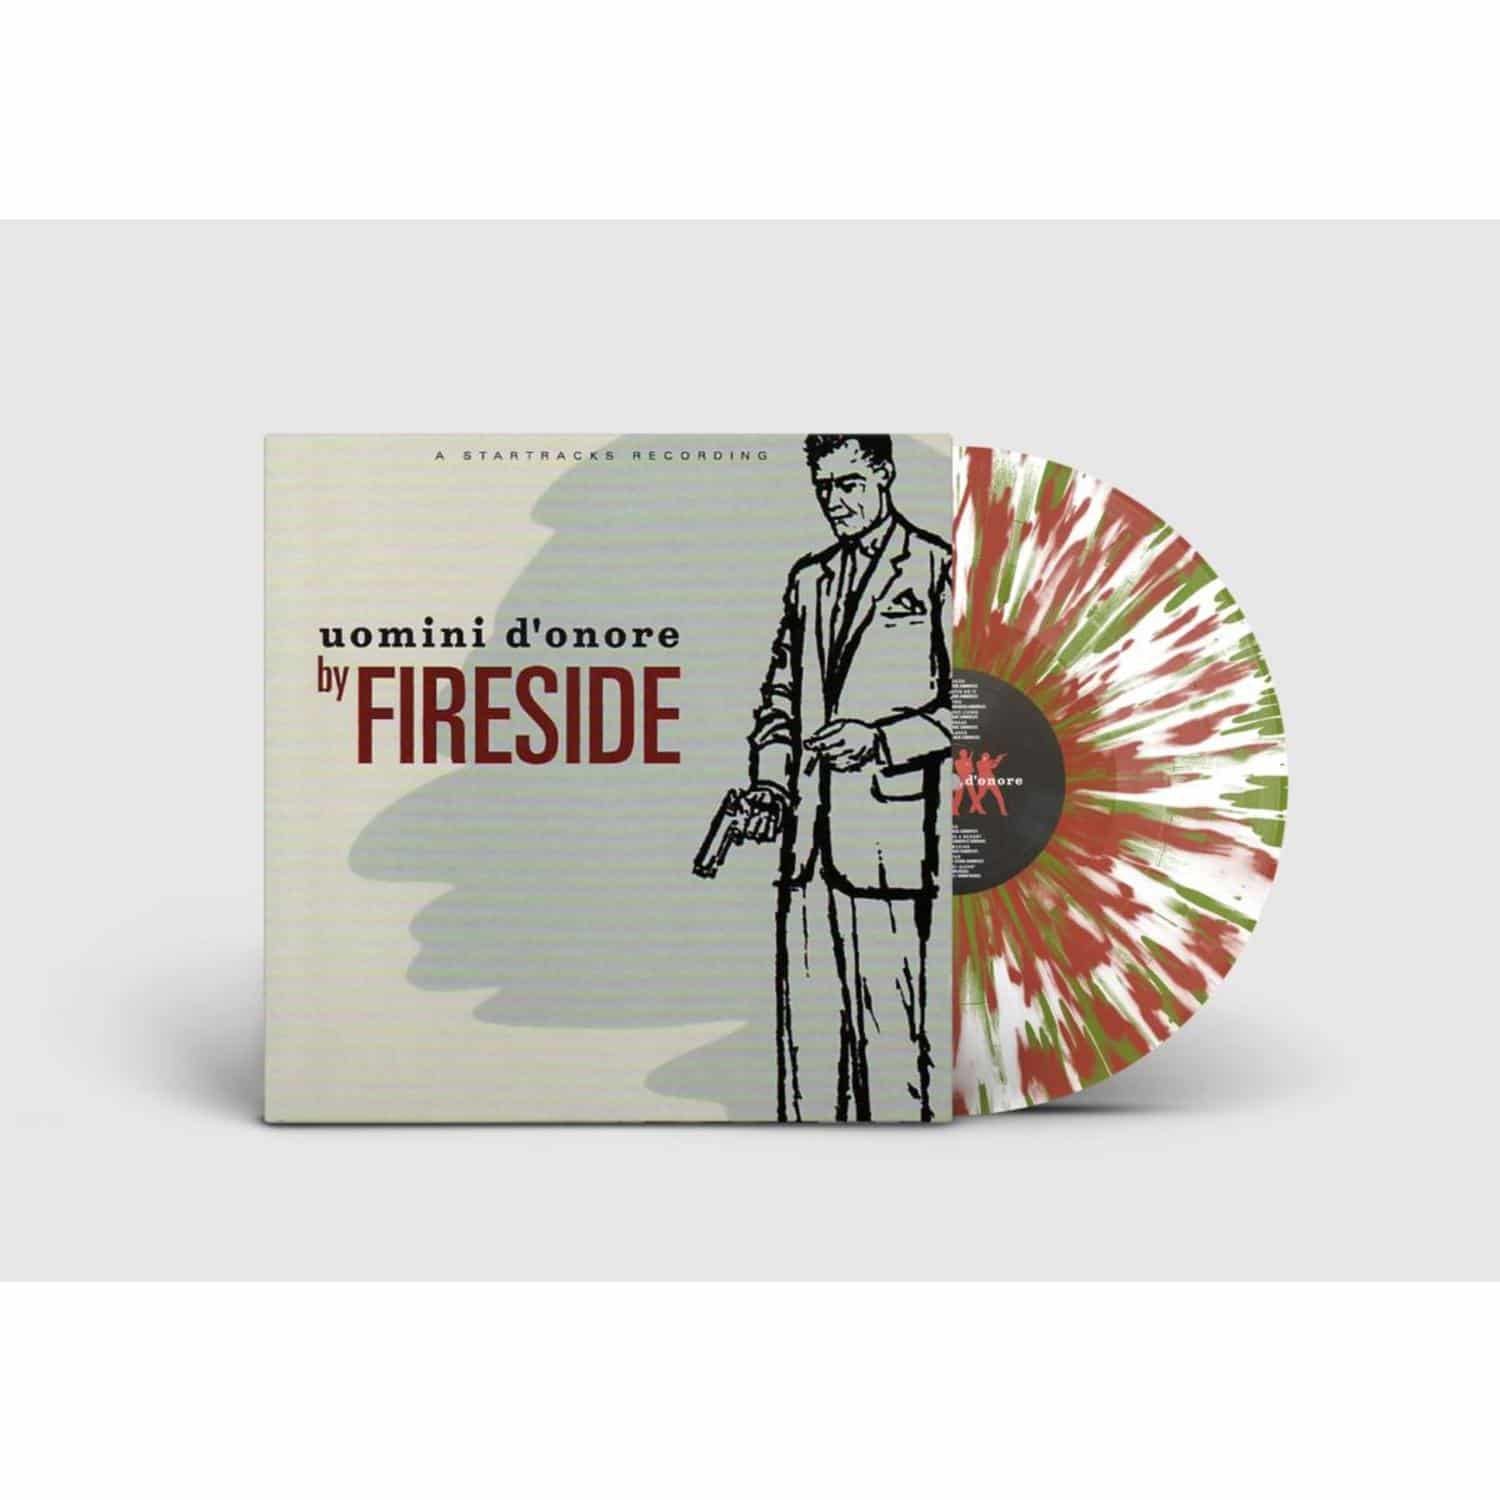 Fireside - UOMINI DONORE 